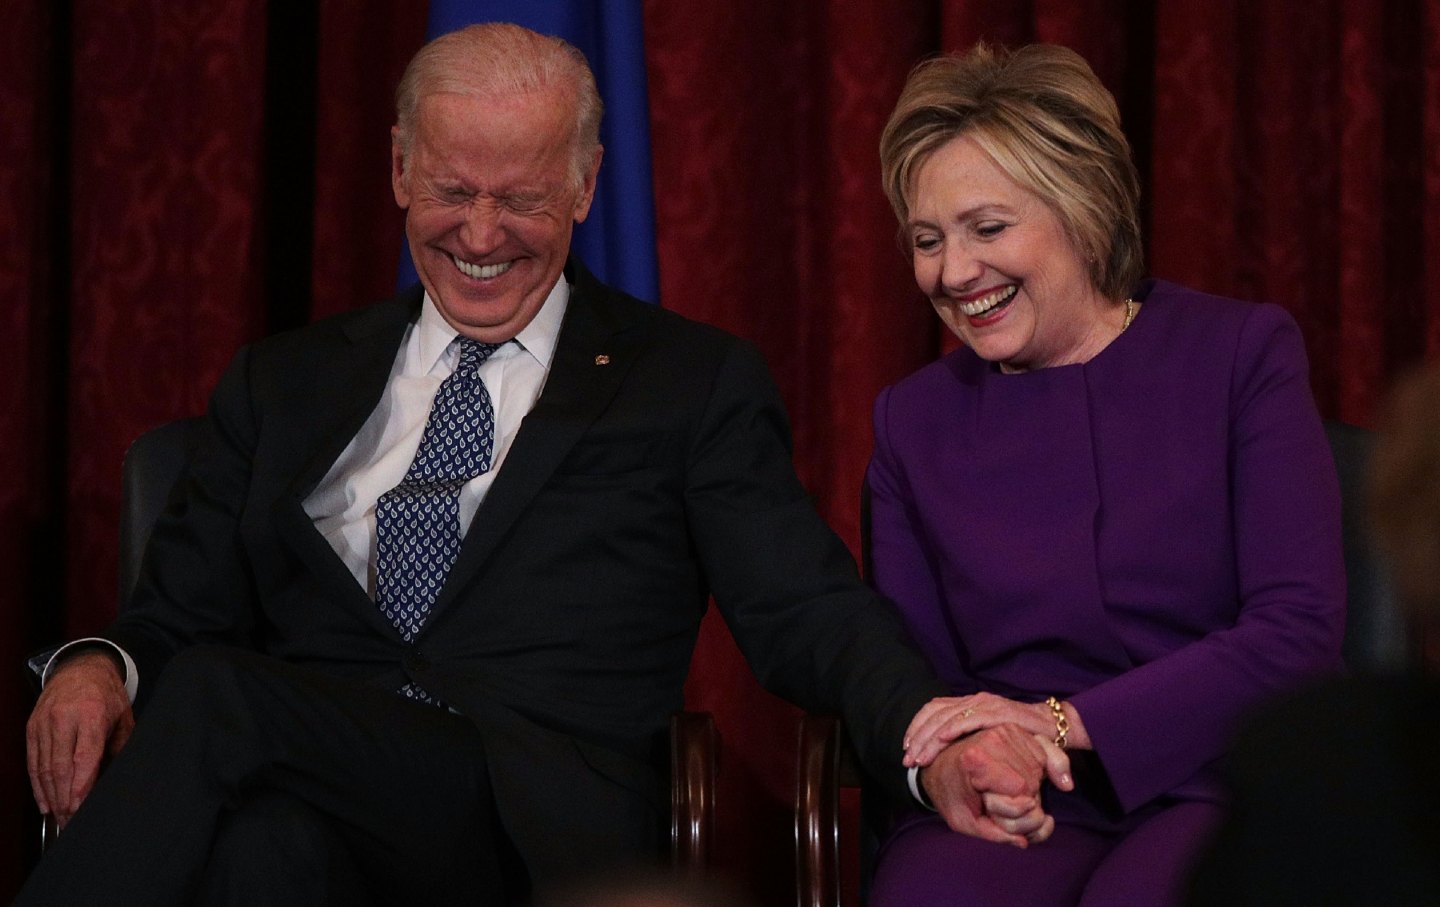 Former US secretary of state Hillary Clinton shares a moment with Vice President Joe Biden during a portrait unveiling ceremony for Senate minority leader Senator Harry Reid on December 8, 2016.